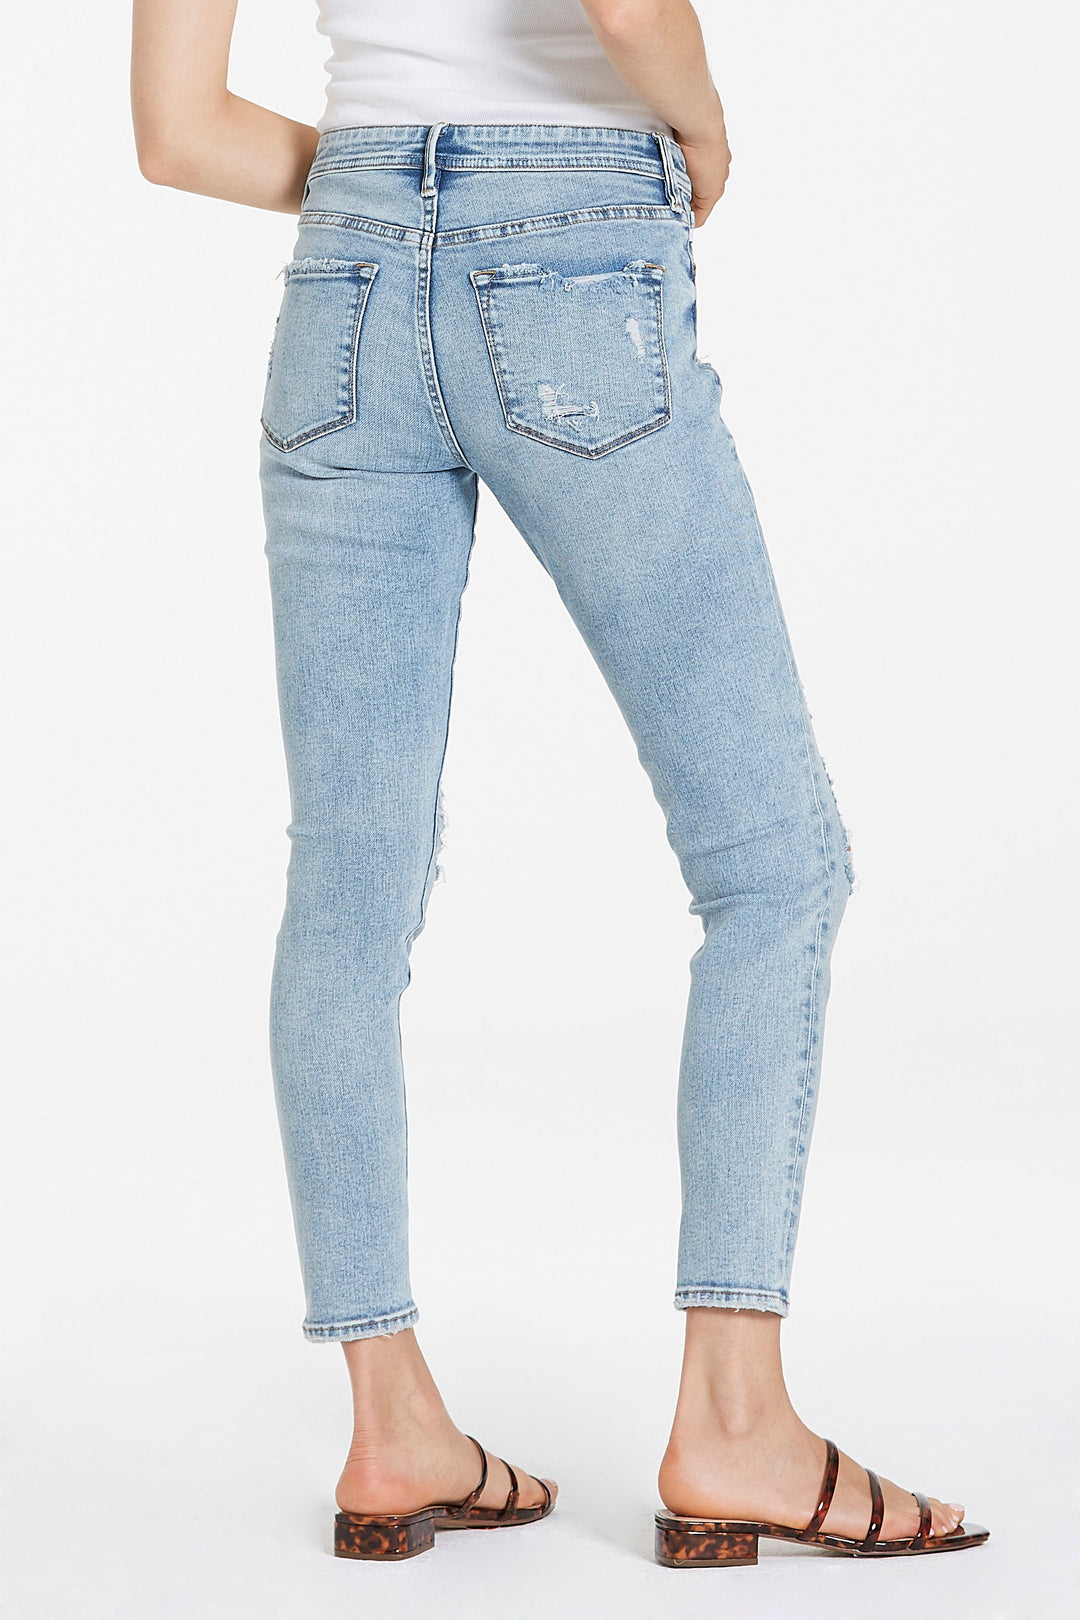 image of a female model wearing a GISELE HIGH RISE ANKLE SKINNY ATLANTIC COAST JEANS JEANS